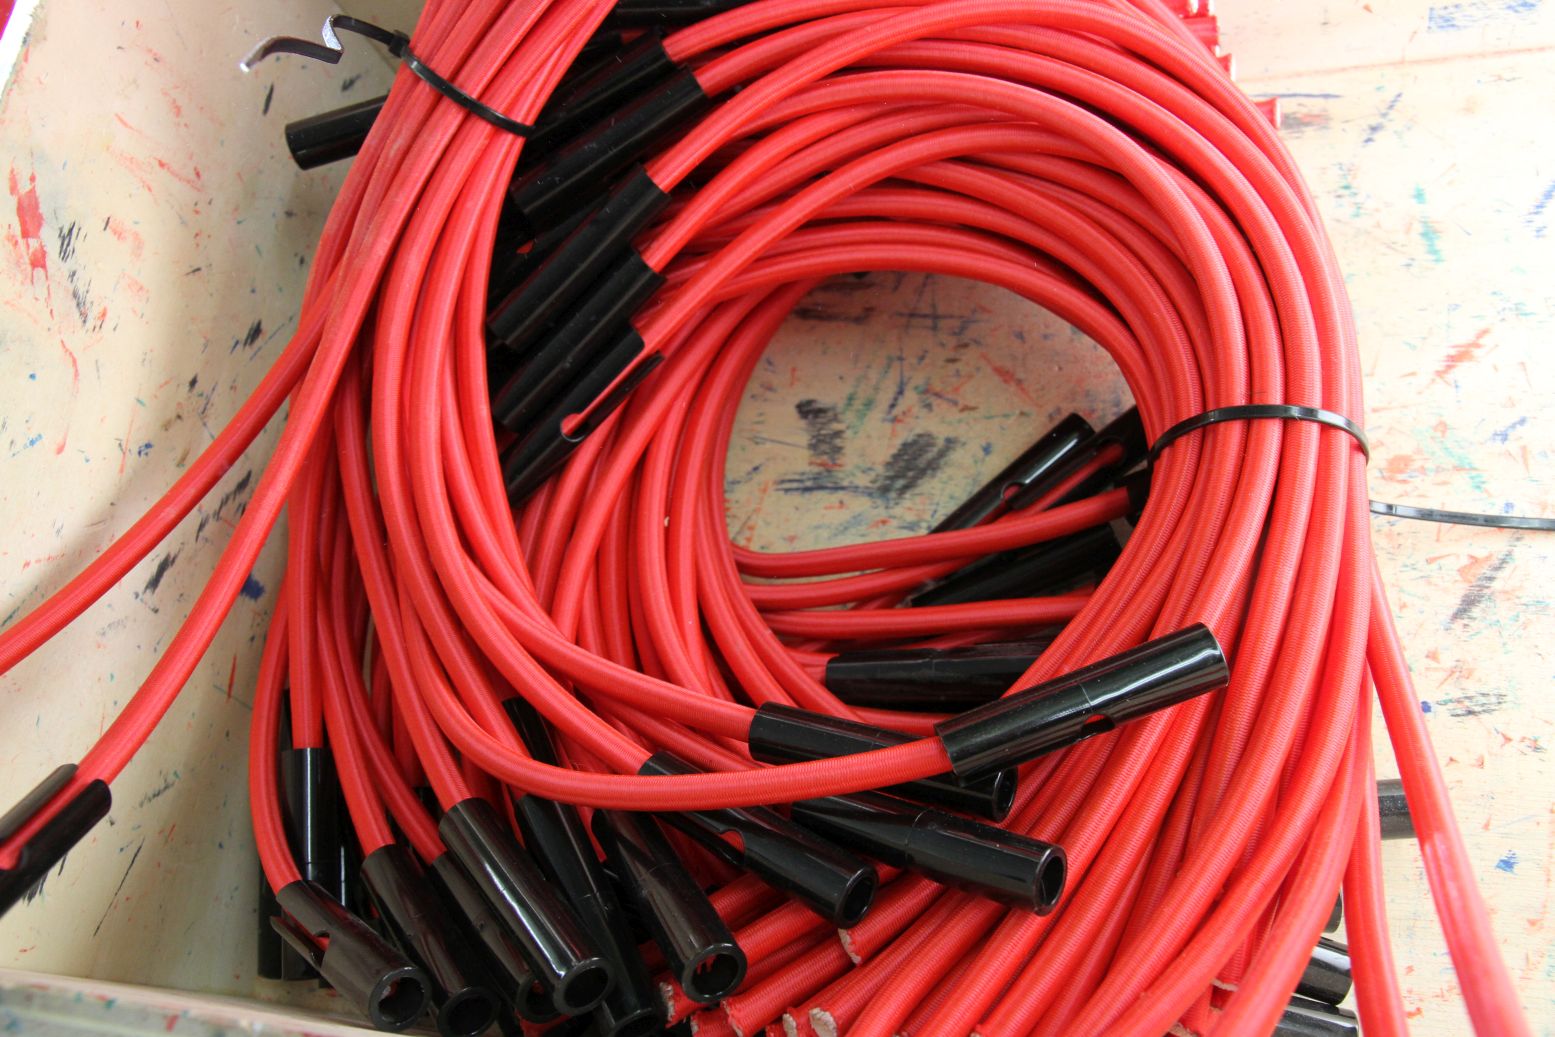 A pile of red tubing with black fasteners will be constructed in a Metalog Tools experiential learning activity or game